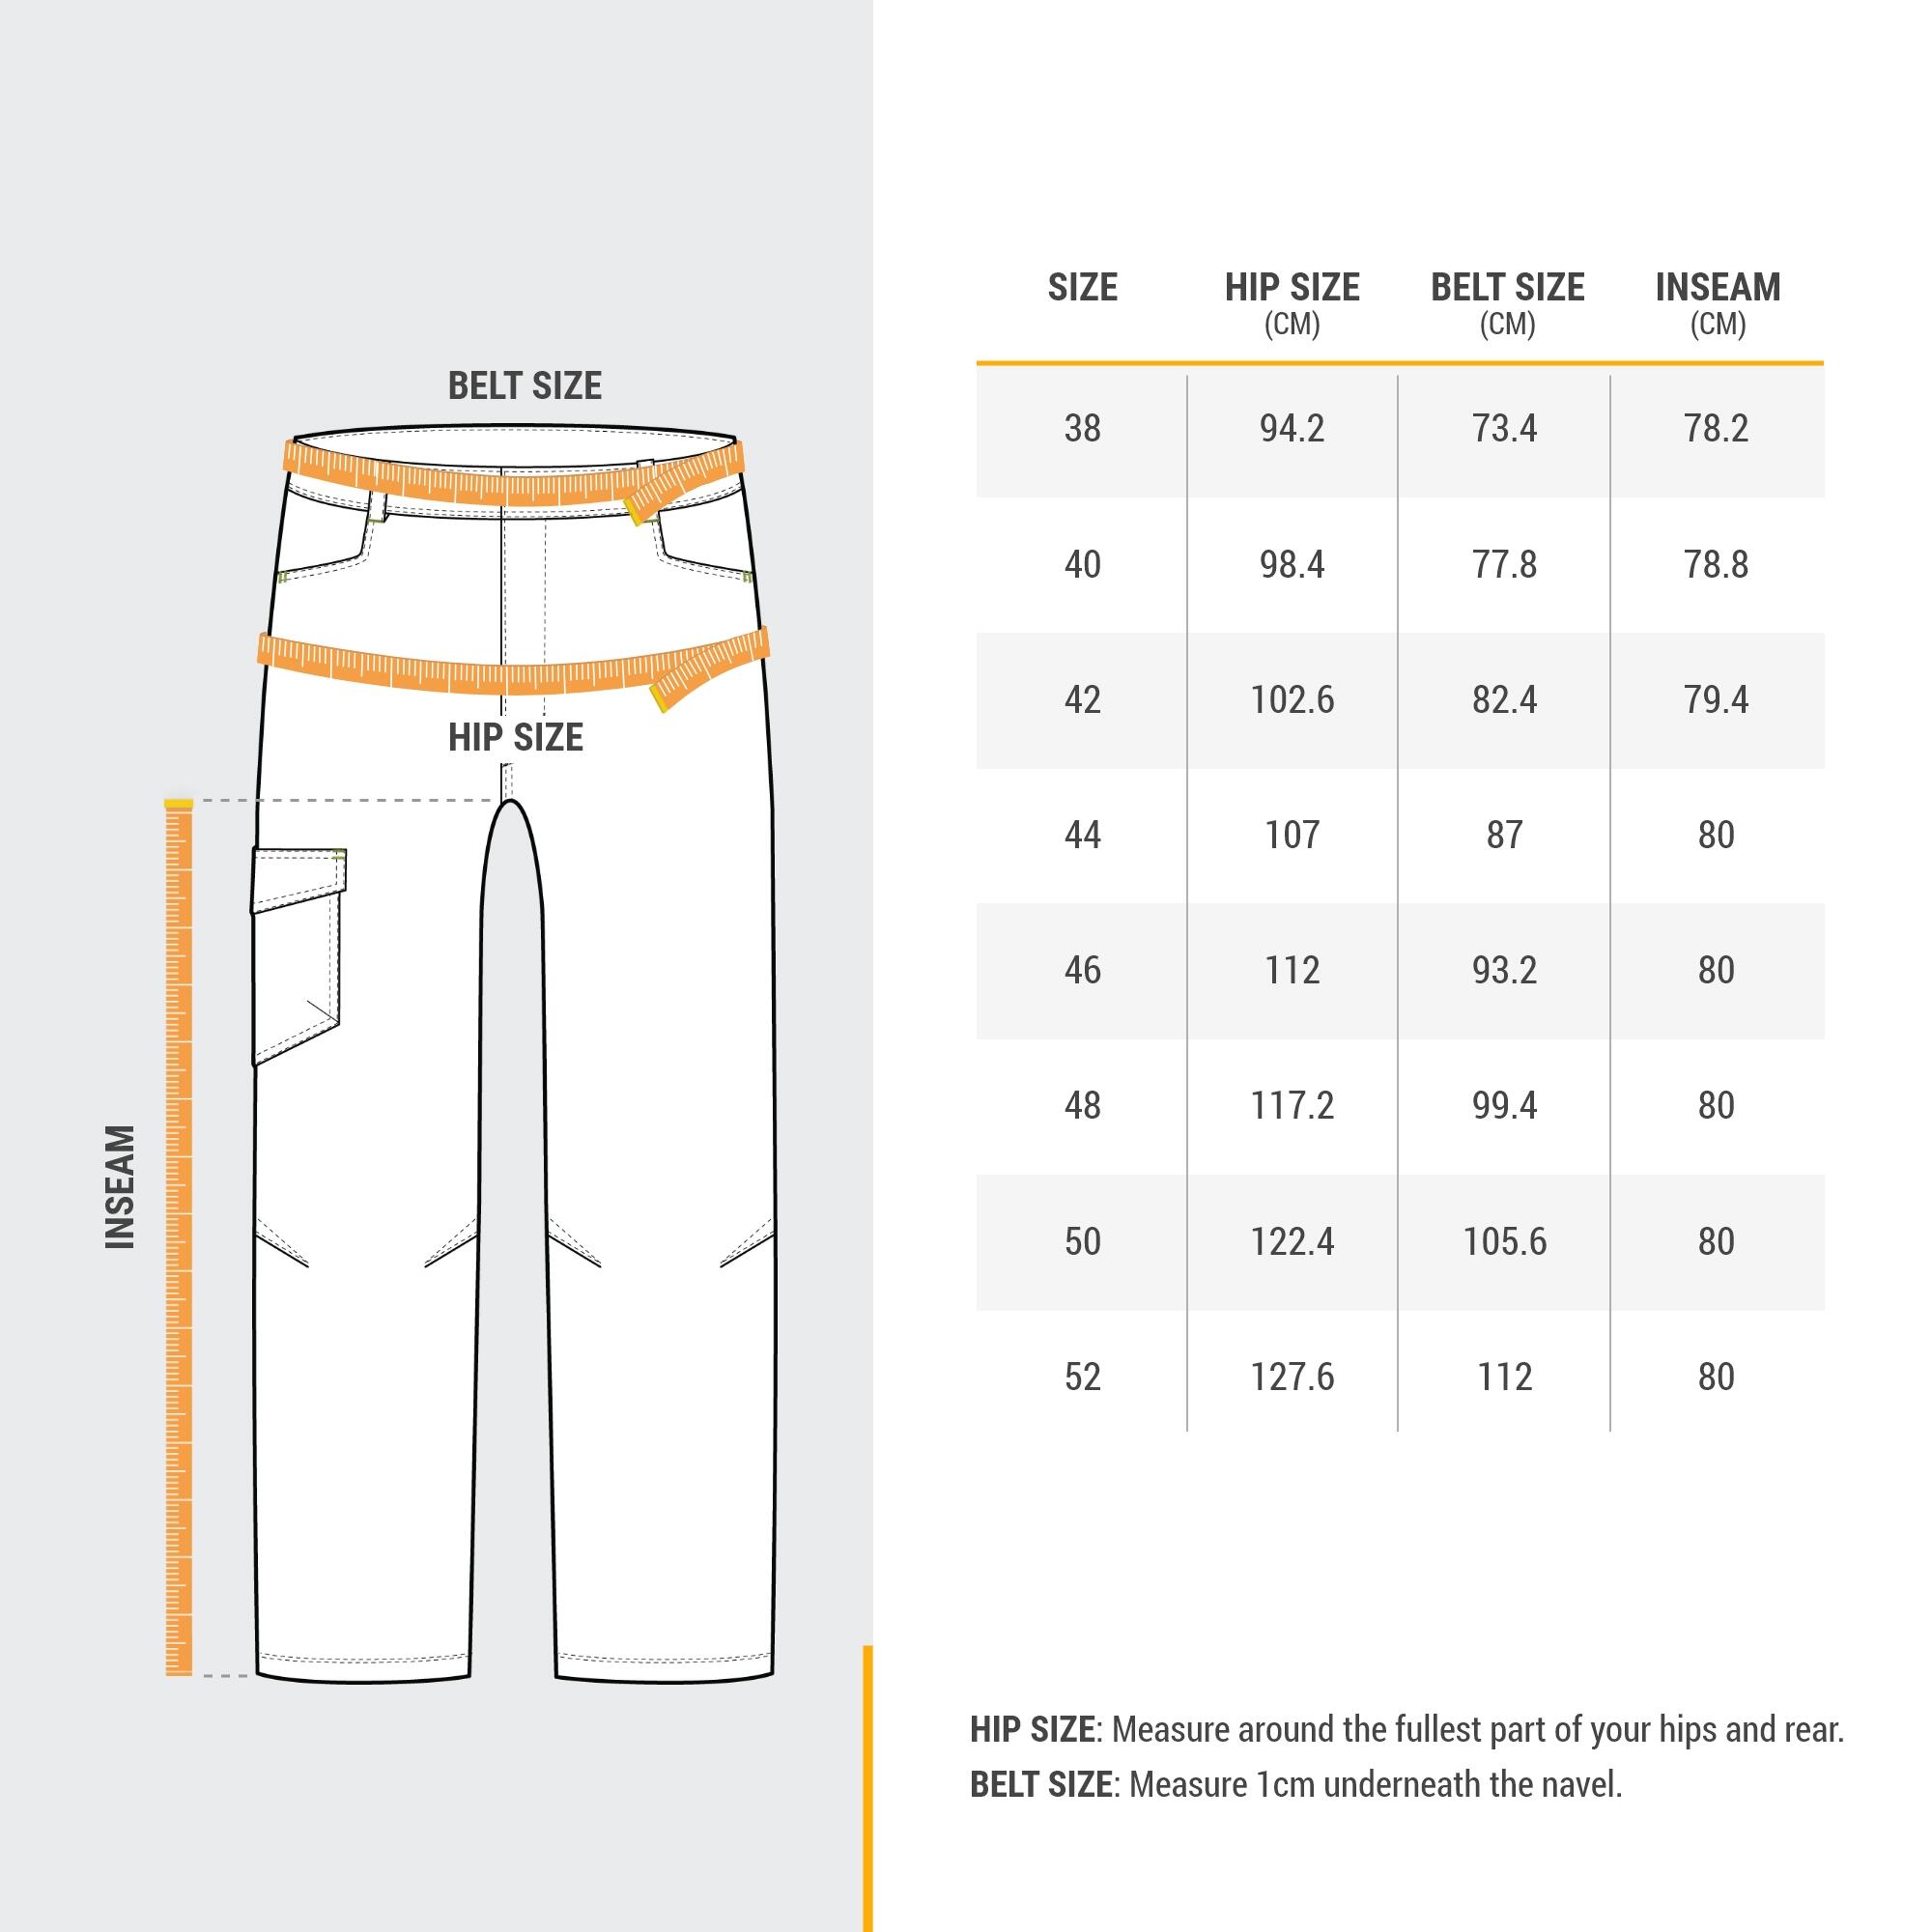 Guide to T Shirt Size Chart India For Men and Women